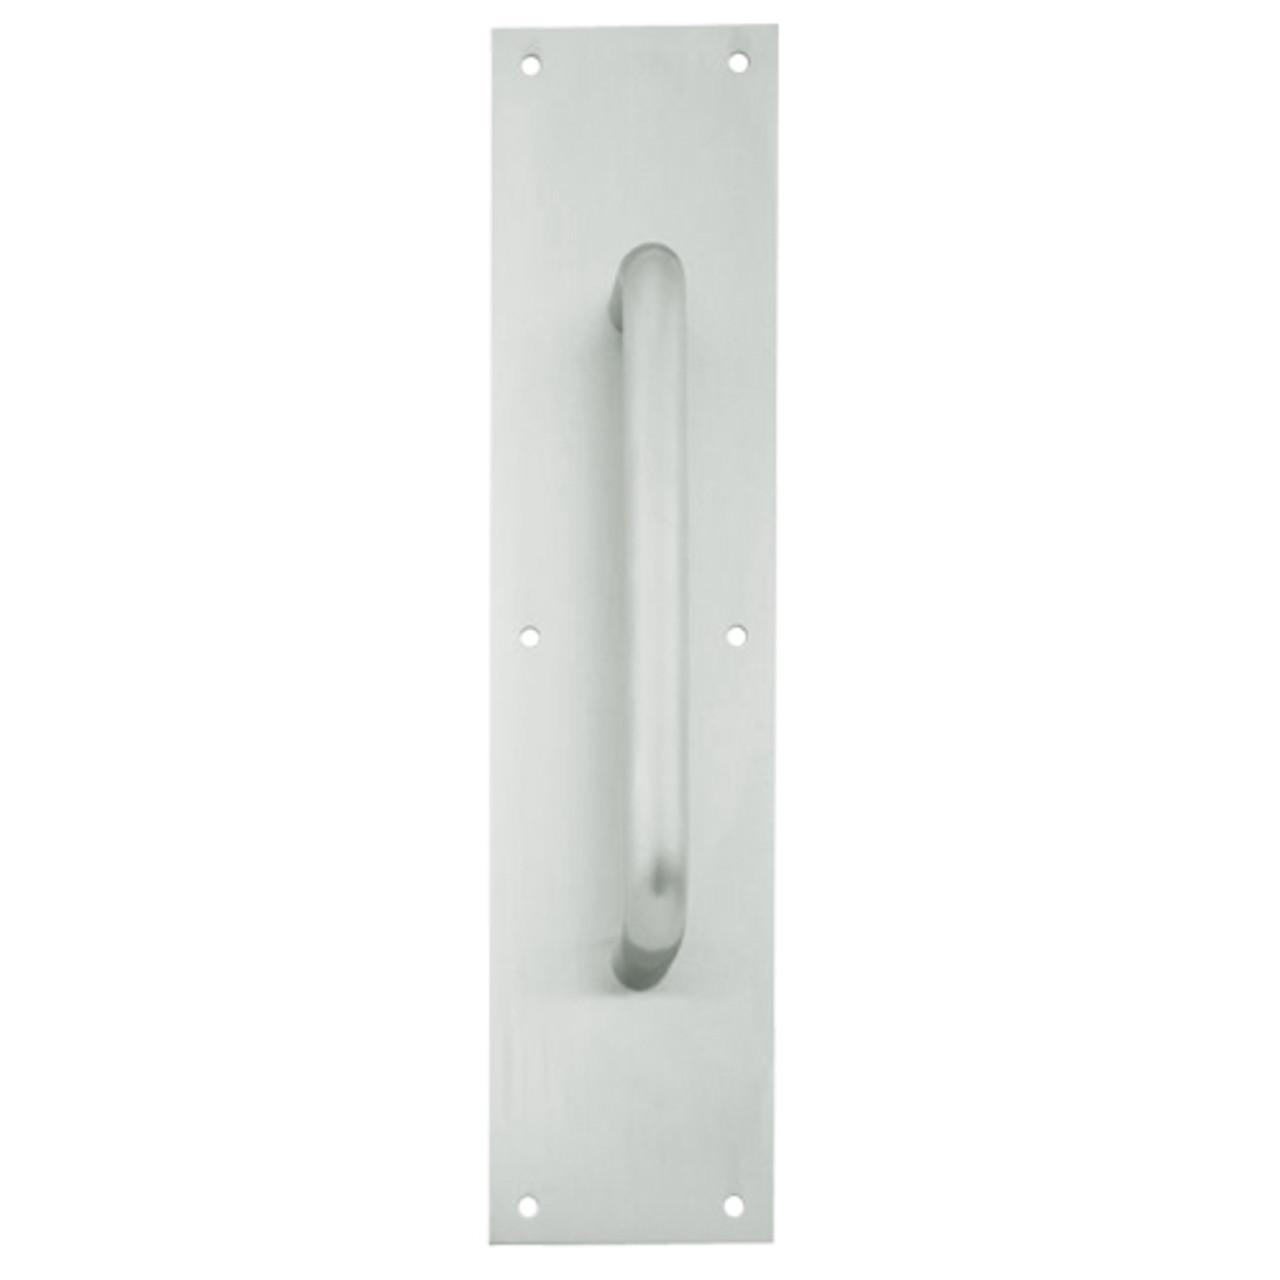 8302-8-US15-4x16 IVES Architectural Door Trim 4x16 Inch Pull Plate in Satin Nickel